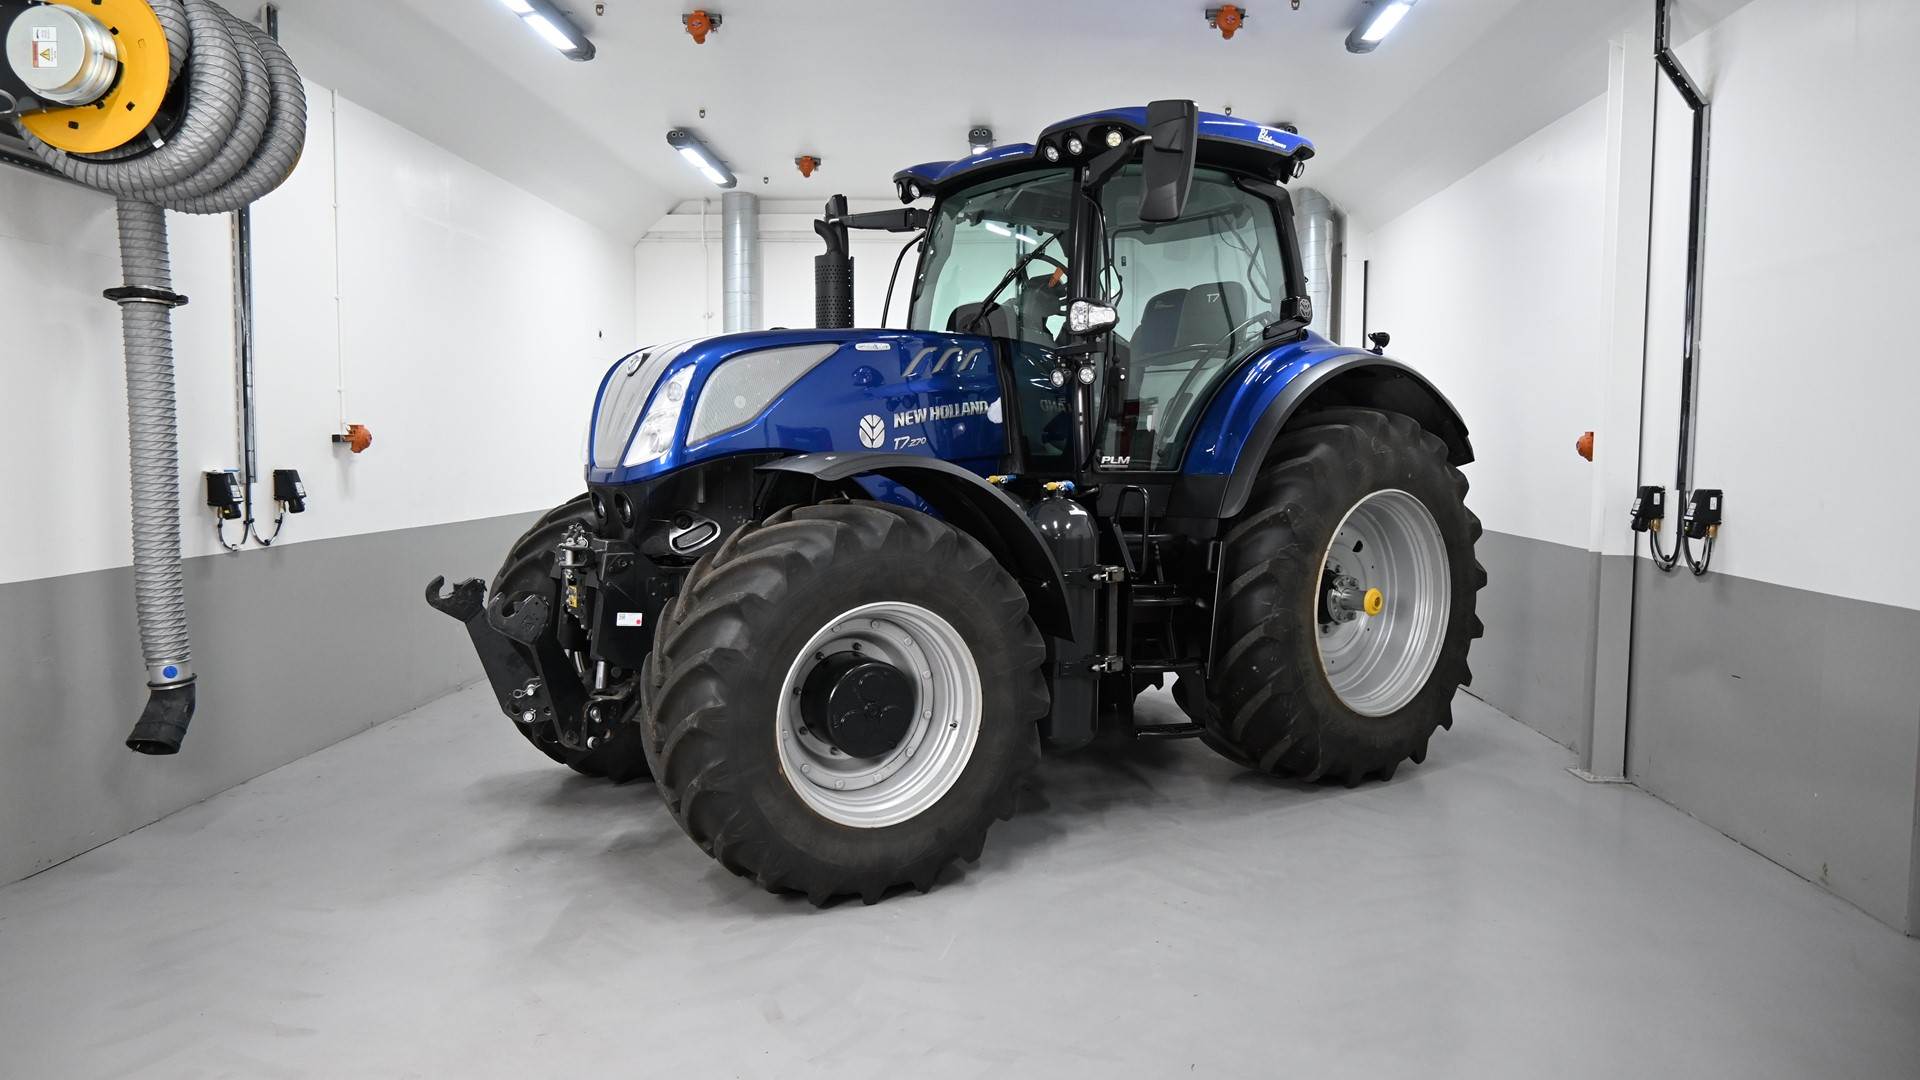 SAME Deutz-Fahr introduces CNG powered tractor at Agritechnica